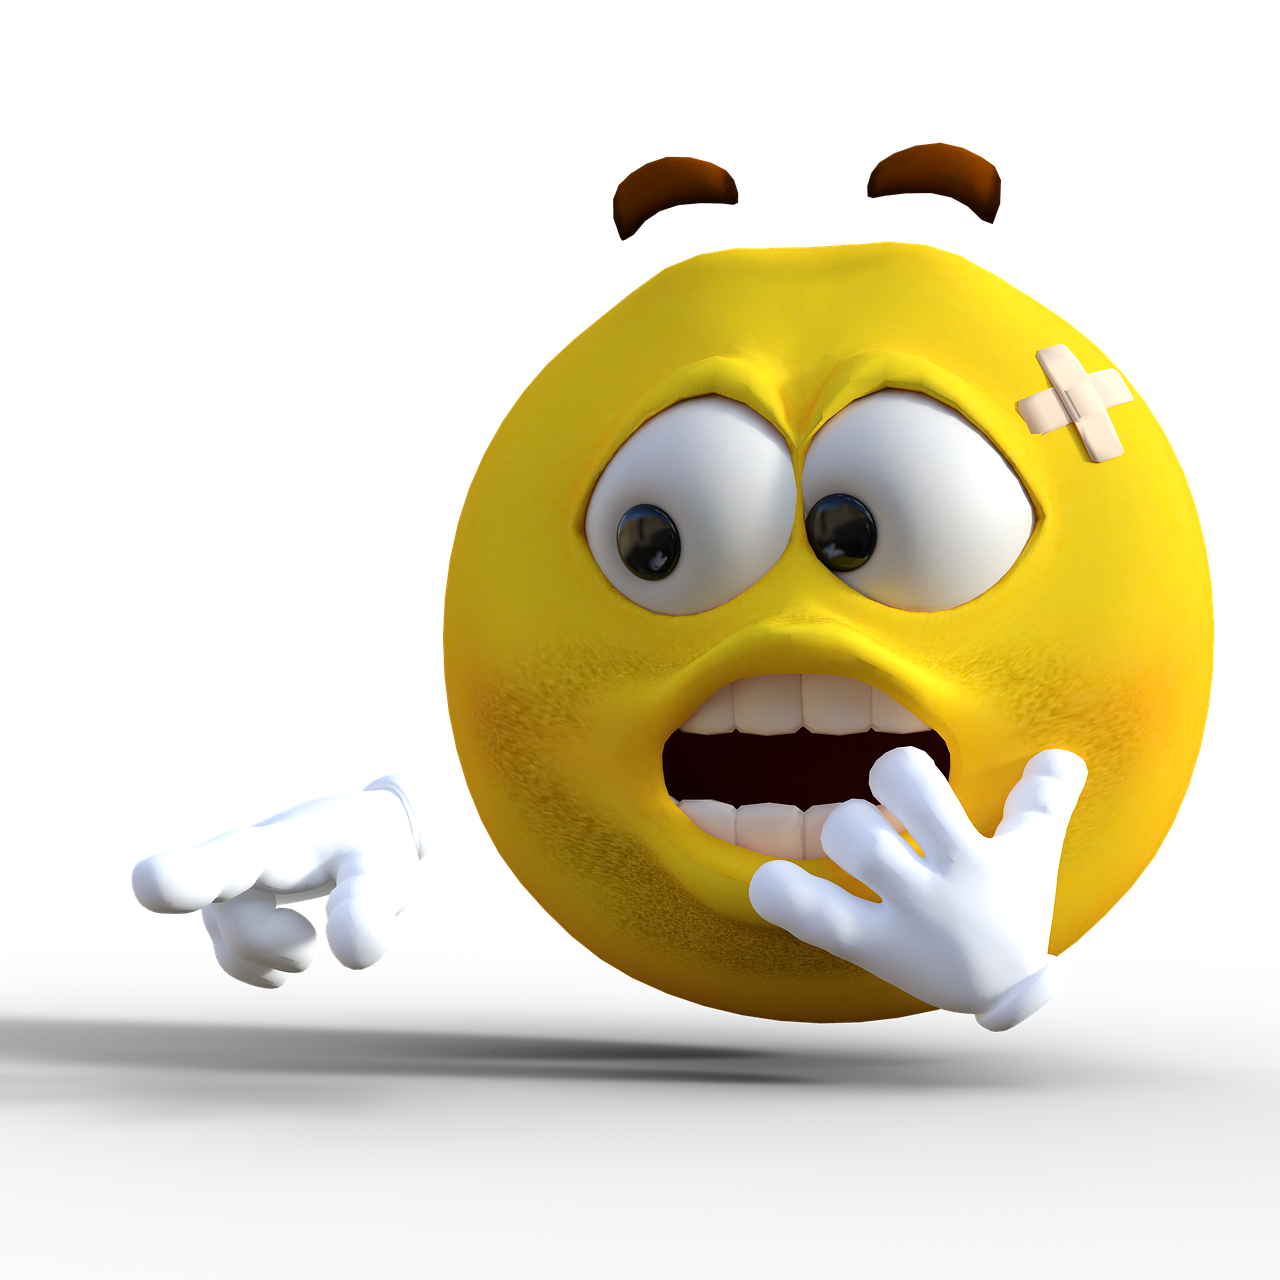 an emo emo emo emo emo emo emo emo emo emo emo emo emo em, a digital rendering, inspired by Heinz Anger, an angry lemon, pointing index finger, c 4 d ”, bee